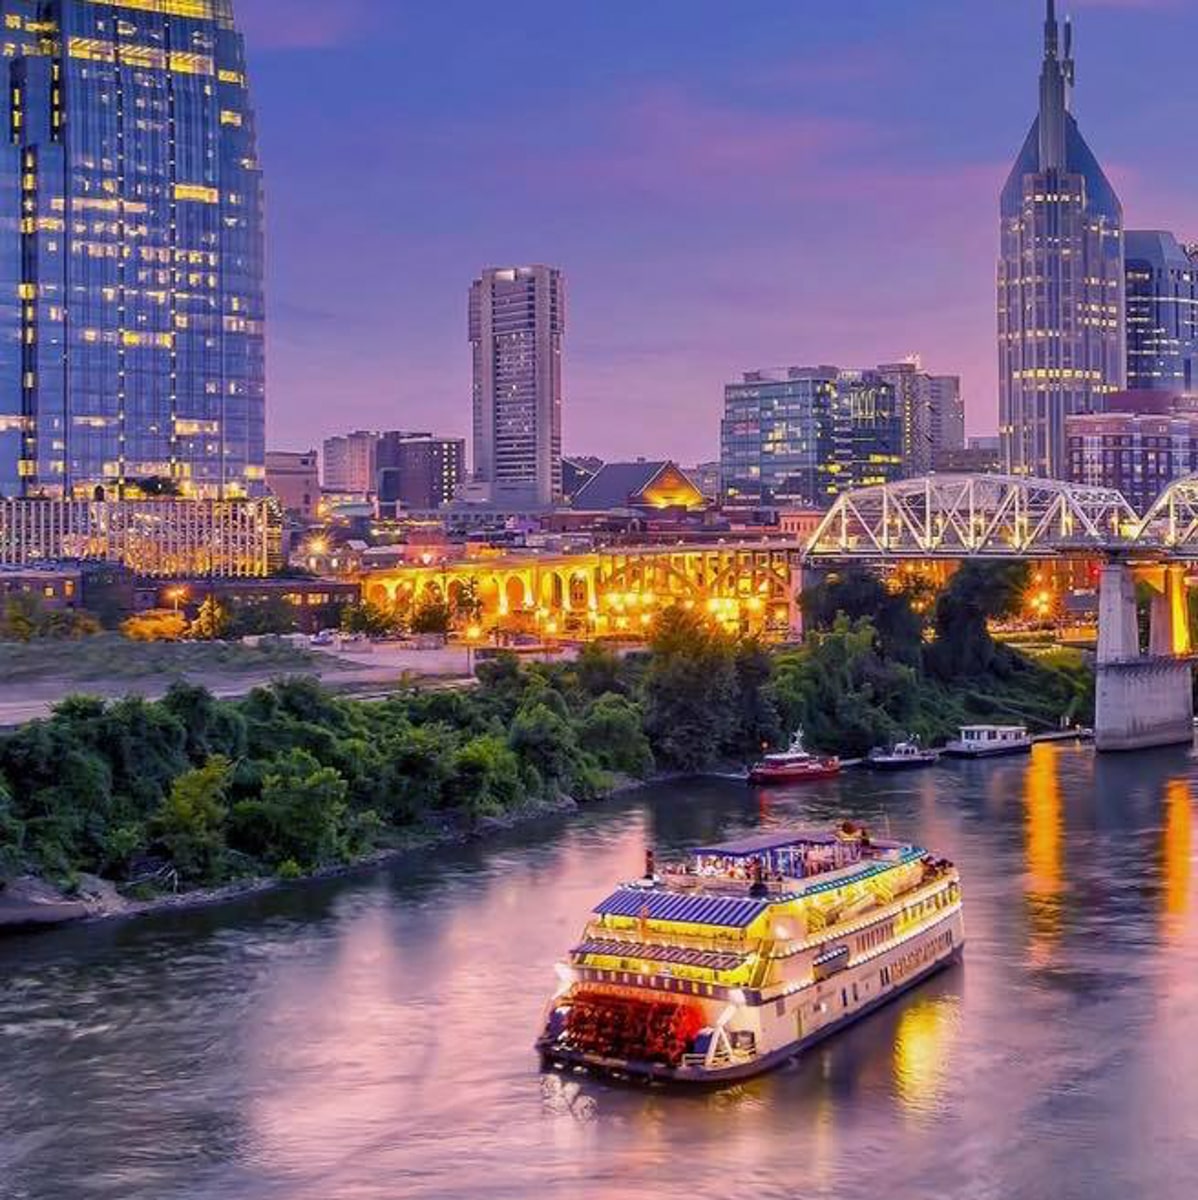 Dinner Cruise tour in Nashville with lights and city skyline